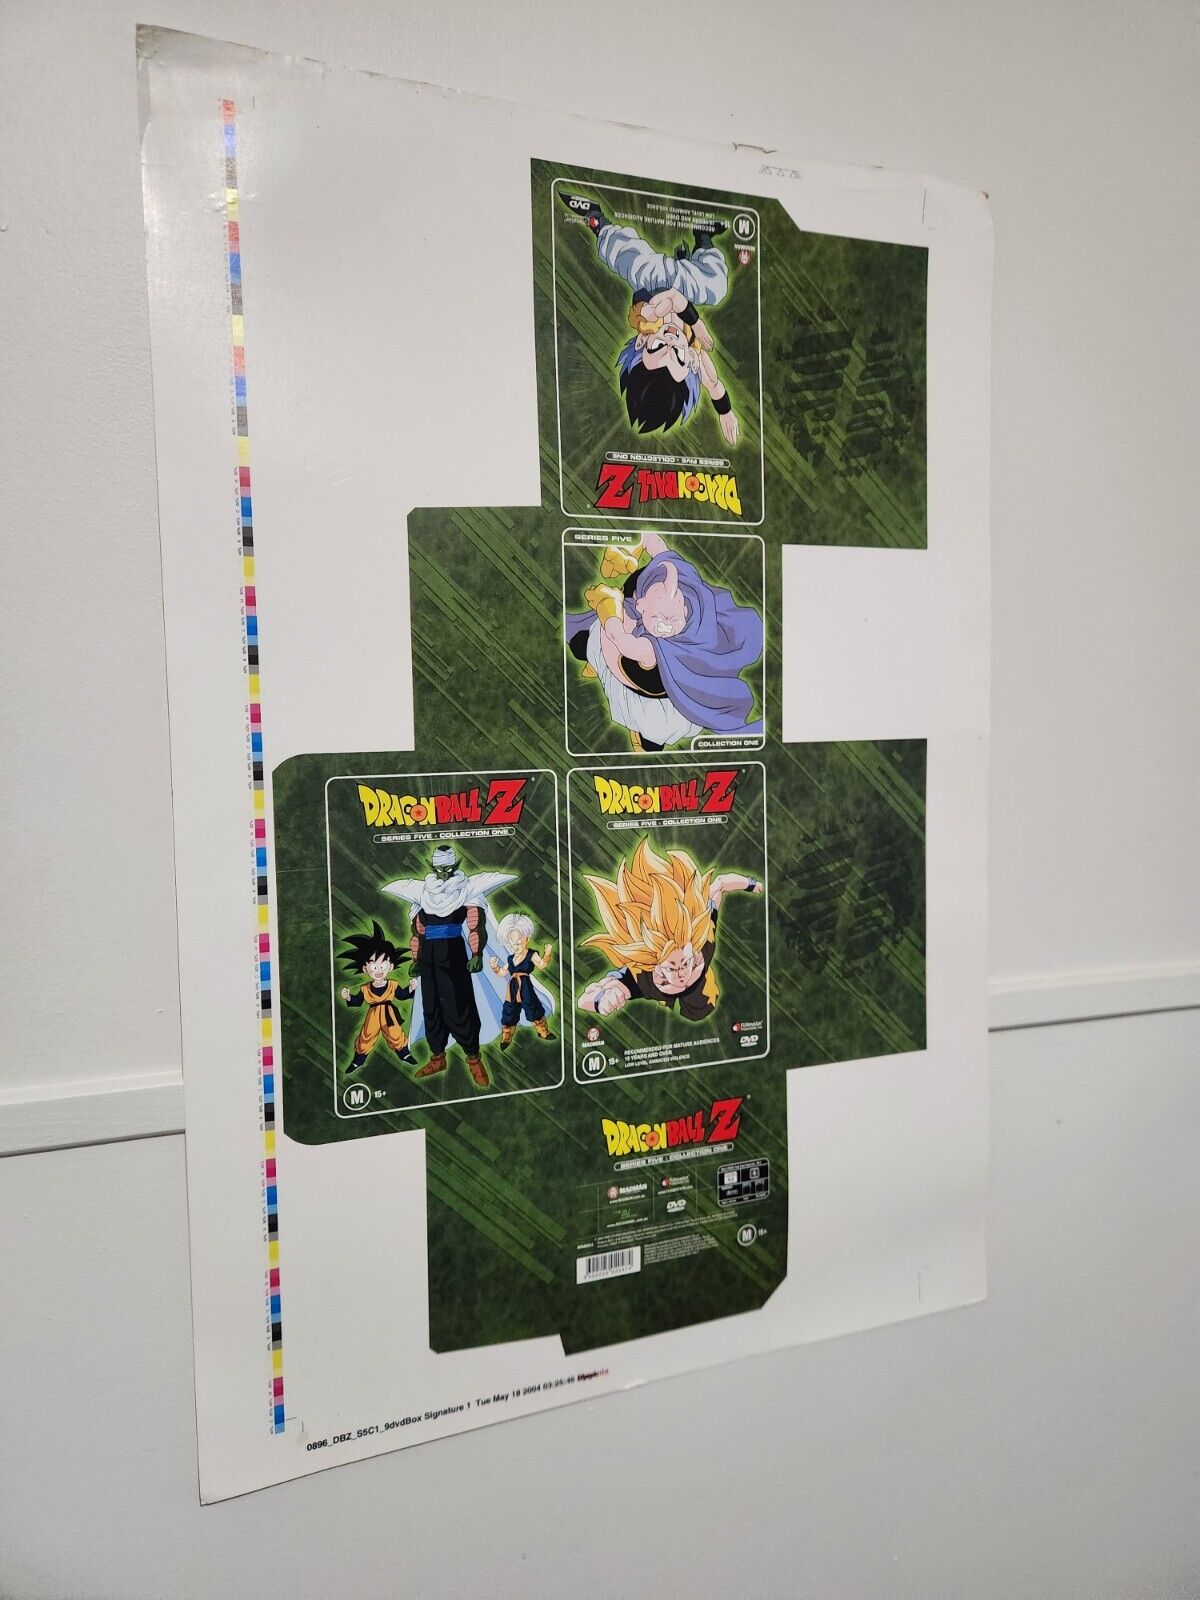 Dbz Dragonball Z Promotional Collectable Foldout Dvd Box (Extremely Rare) 2004